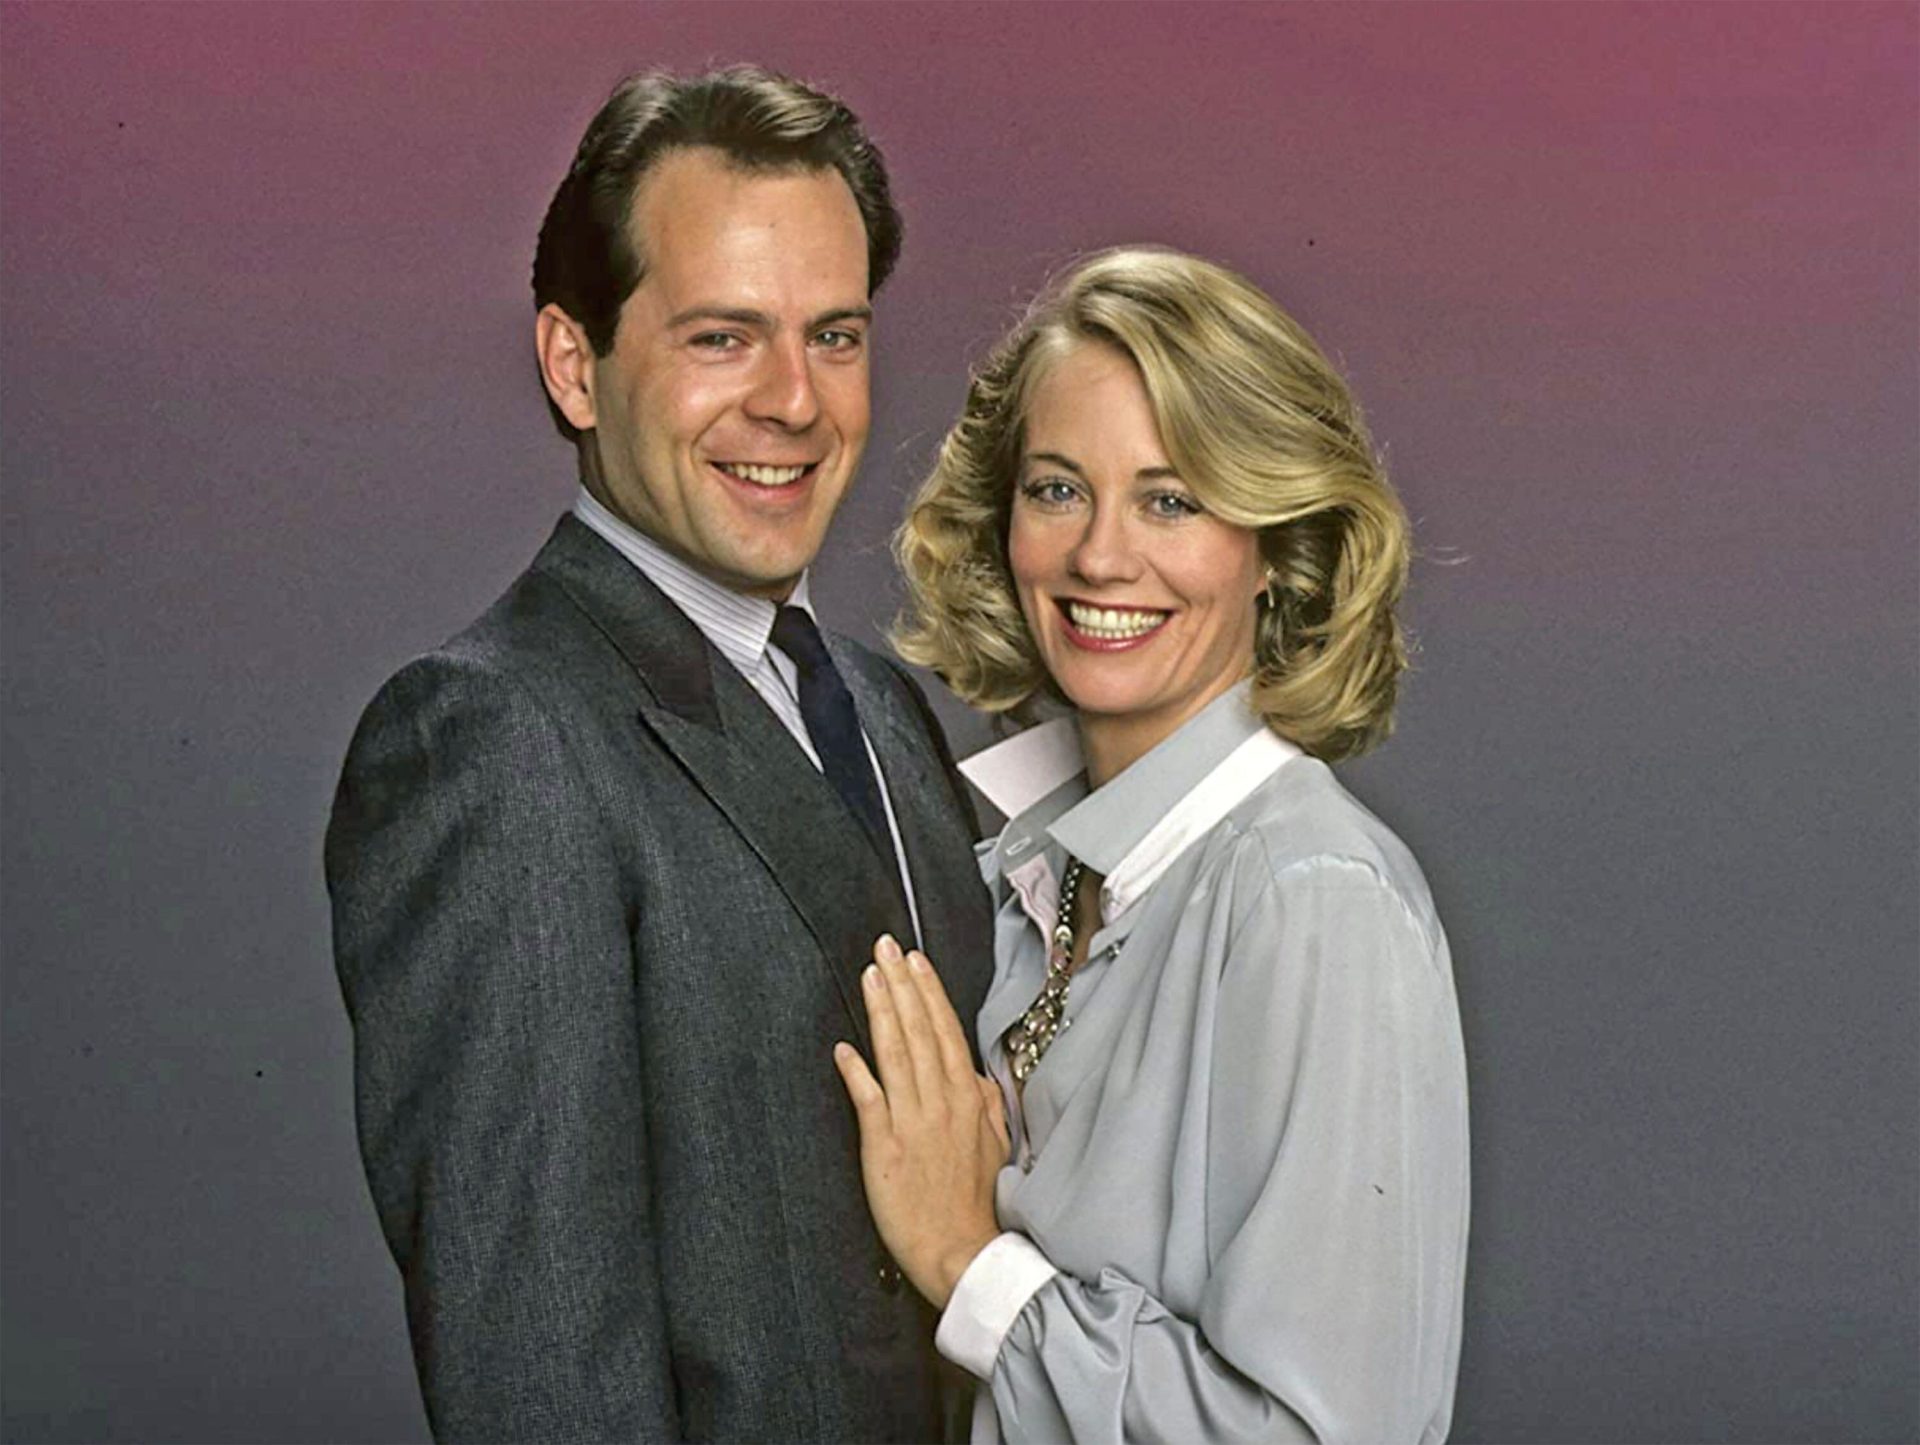 Bruce Willis with Cybil Shepherd in the TV series 'Moonlighting', which originally ran from 1985 to 1989